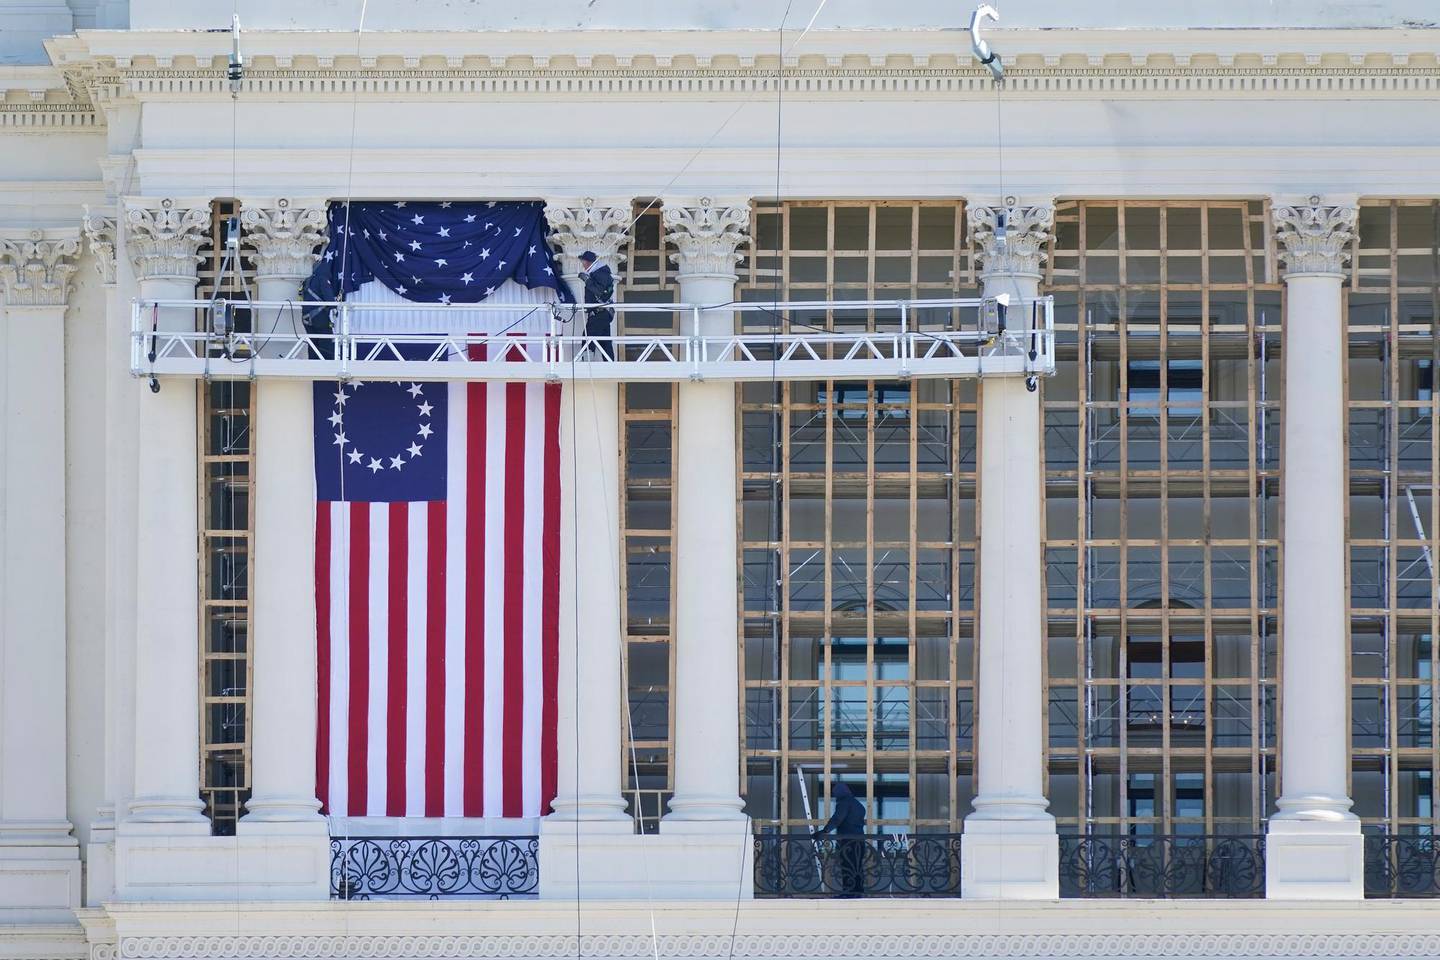 Workers install a flag on the West Front of the U.S. Capitol as preparations take place for President-elect Joe Biden's inauguration, Saturday, Jan. 9, 2021, in Washington. (AP Photo/Patrick Semansky)